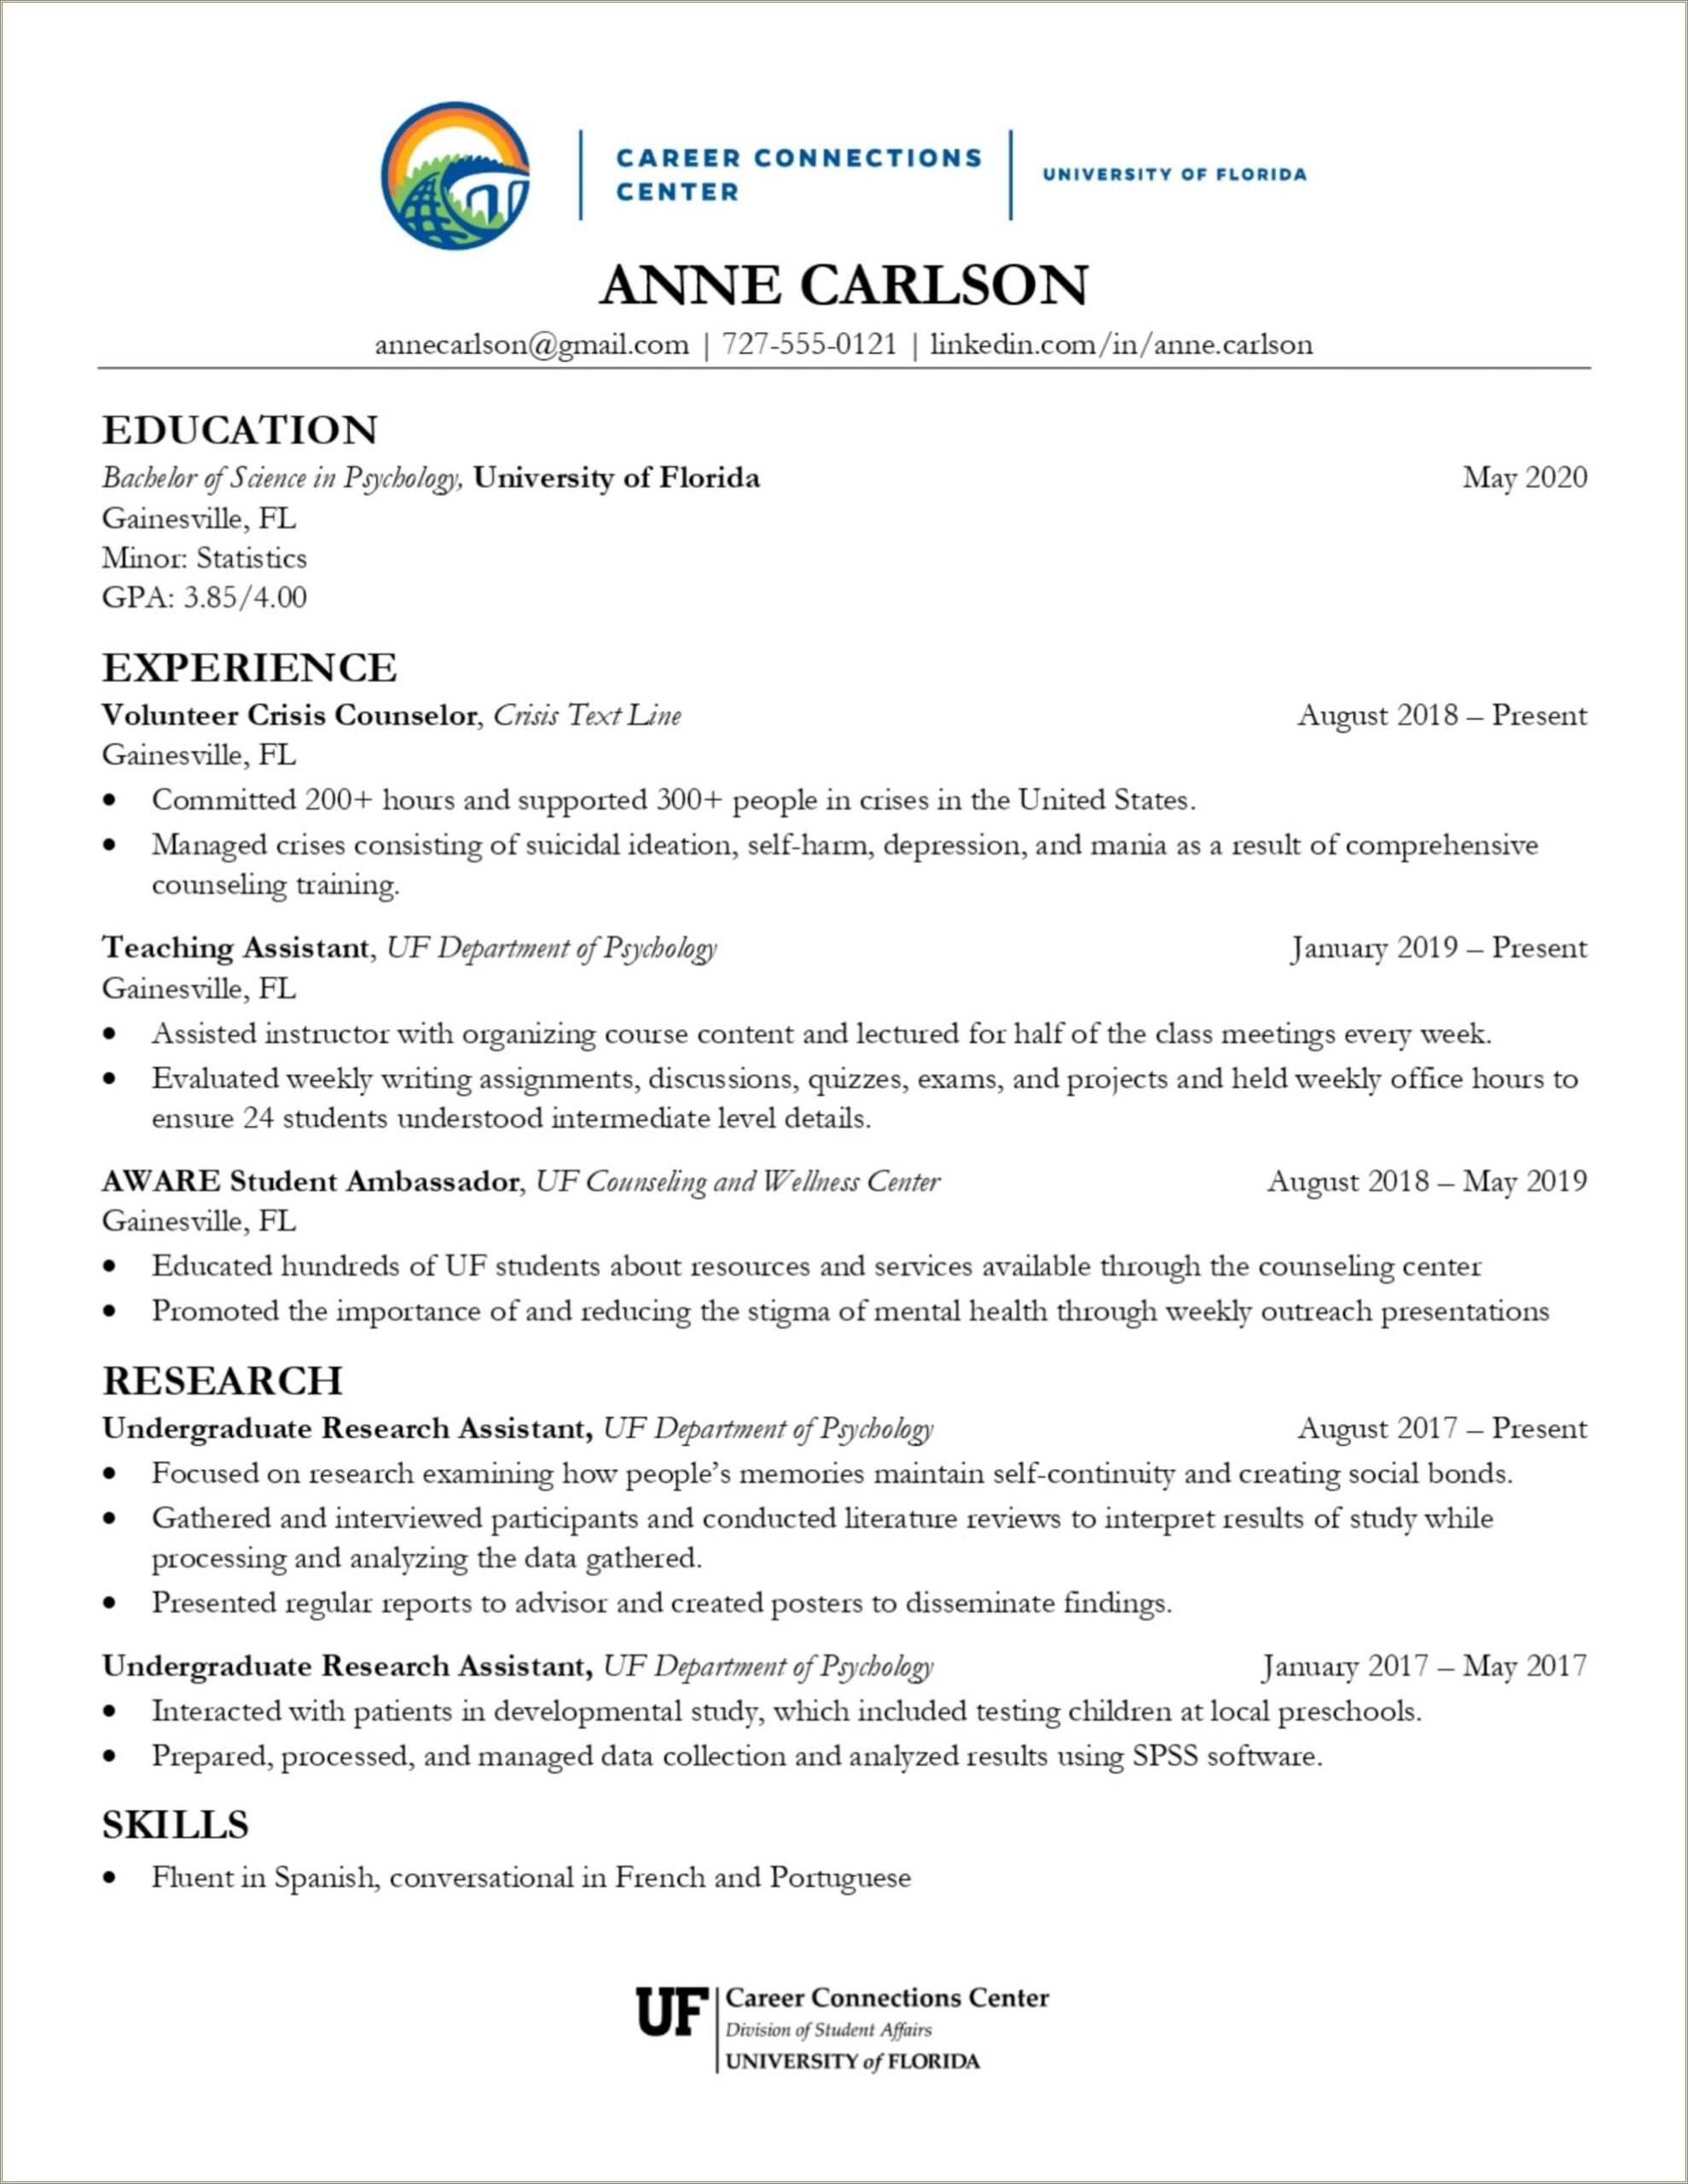 Independent Information Technology Contractor Job Description For Resume